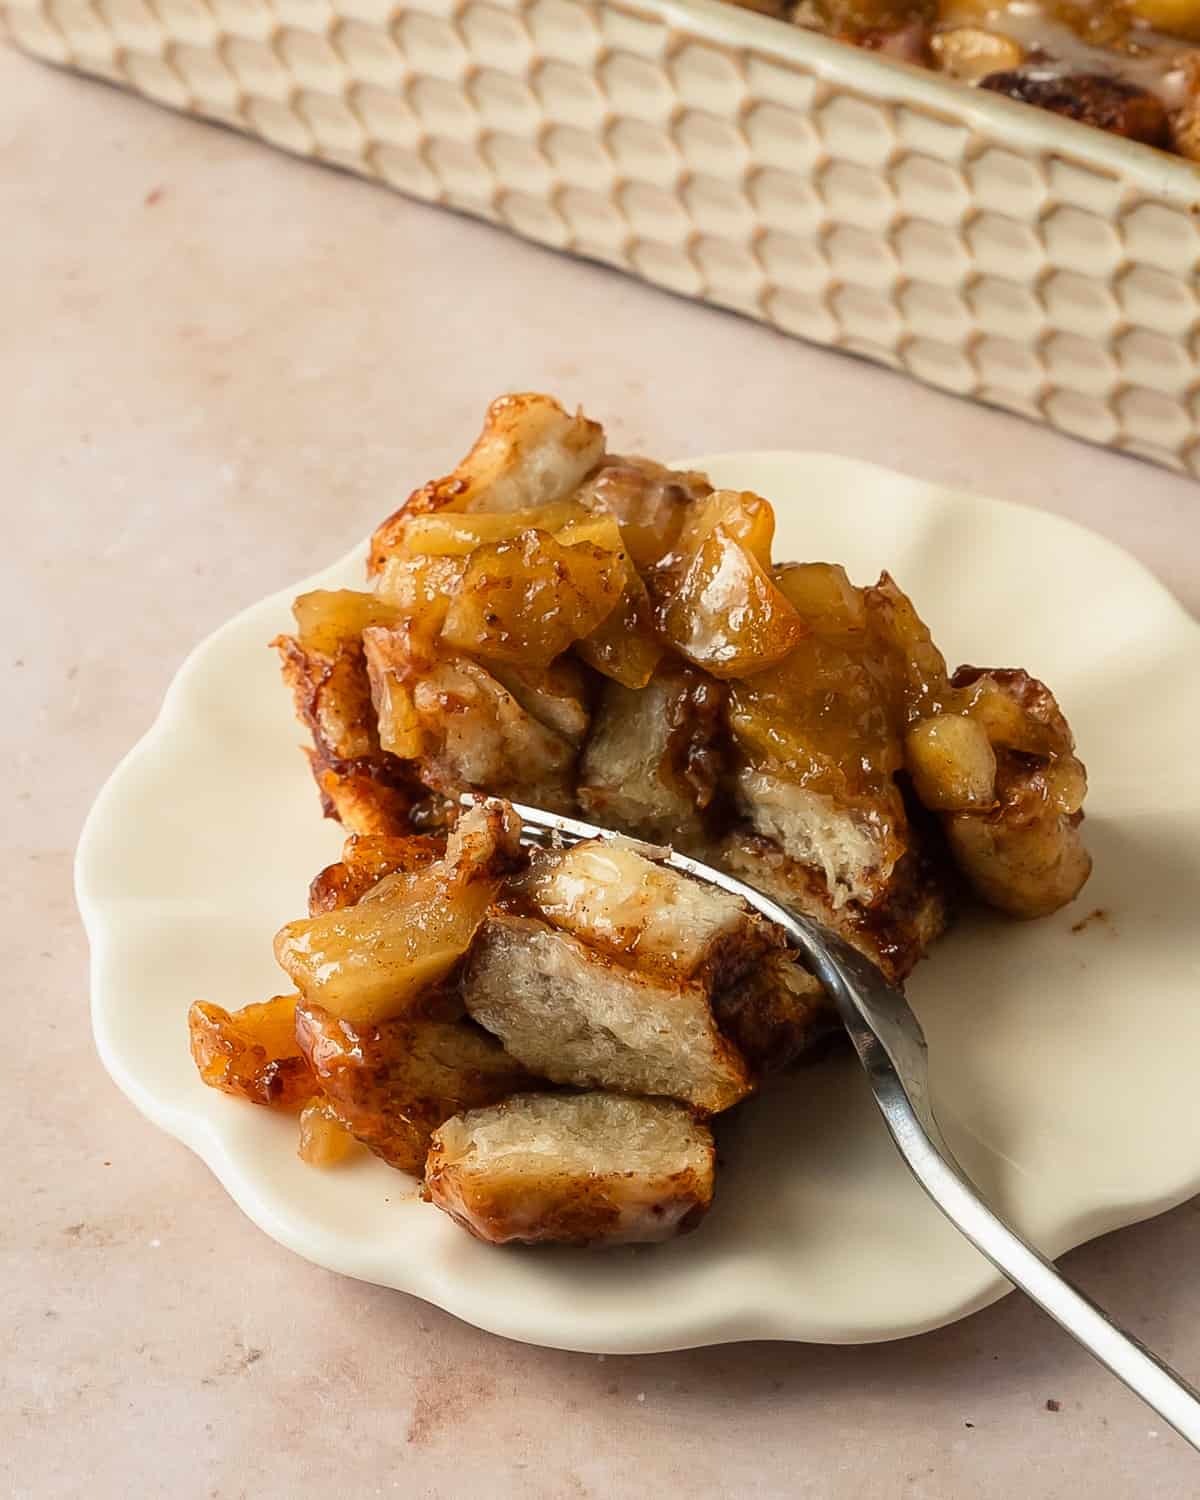 Cinnamon rolls and apple pie filling is an almost 2 ingredient cinnamon roll bake filled with warm apple pie sauce and chunks of sweet, gooey apples. This quick and easy apple pie cinnamon roll cobbler makes the perfect weekend treat or a special holiday breakfast or dessert.